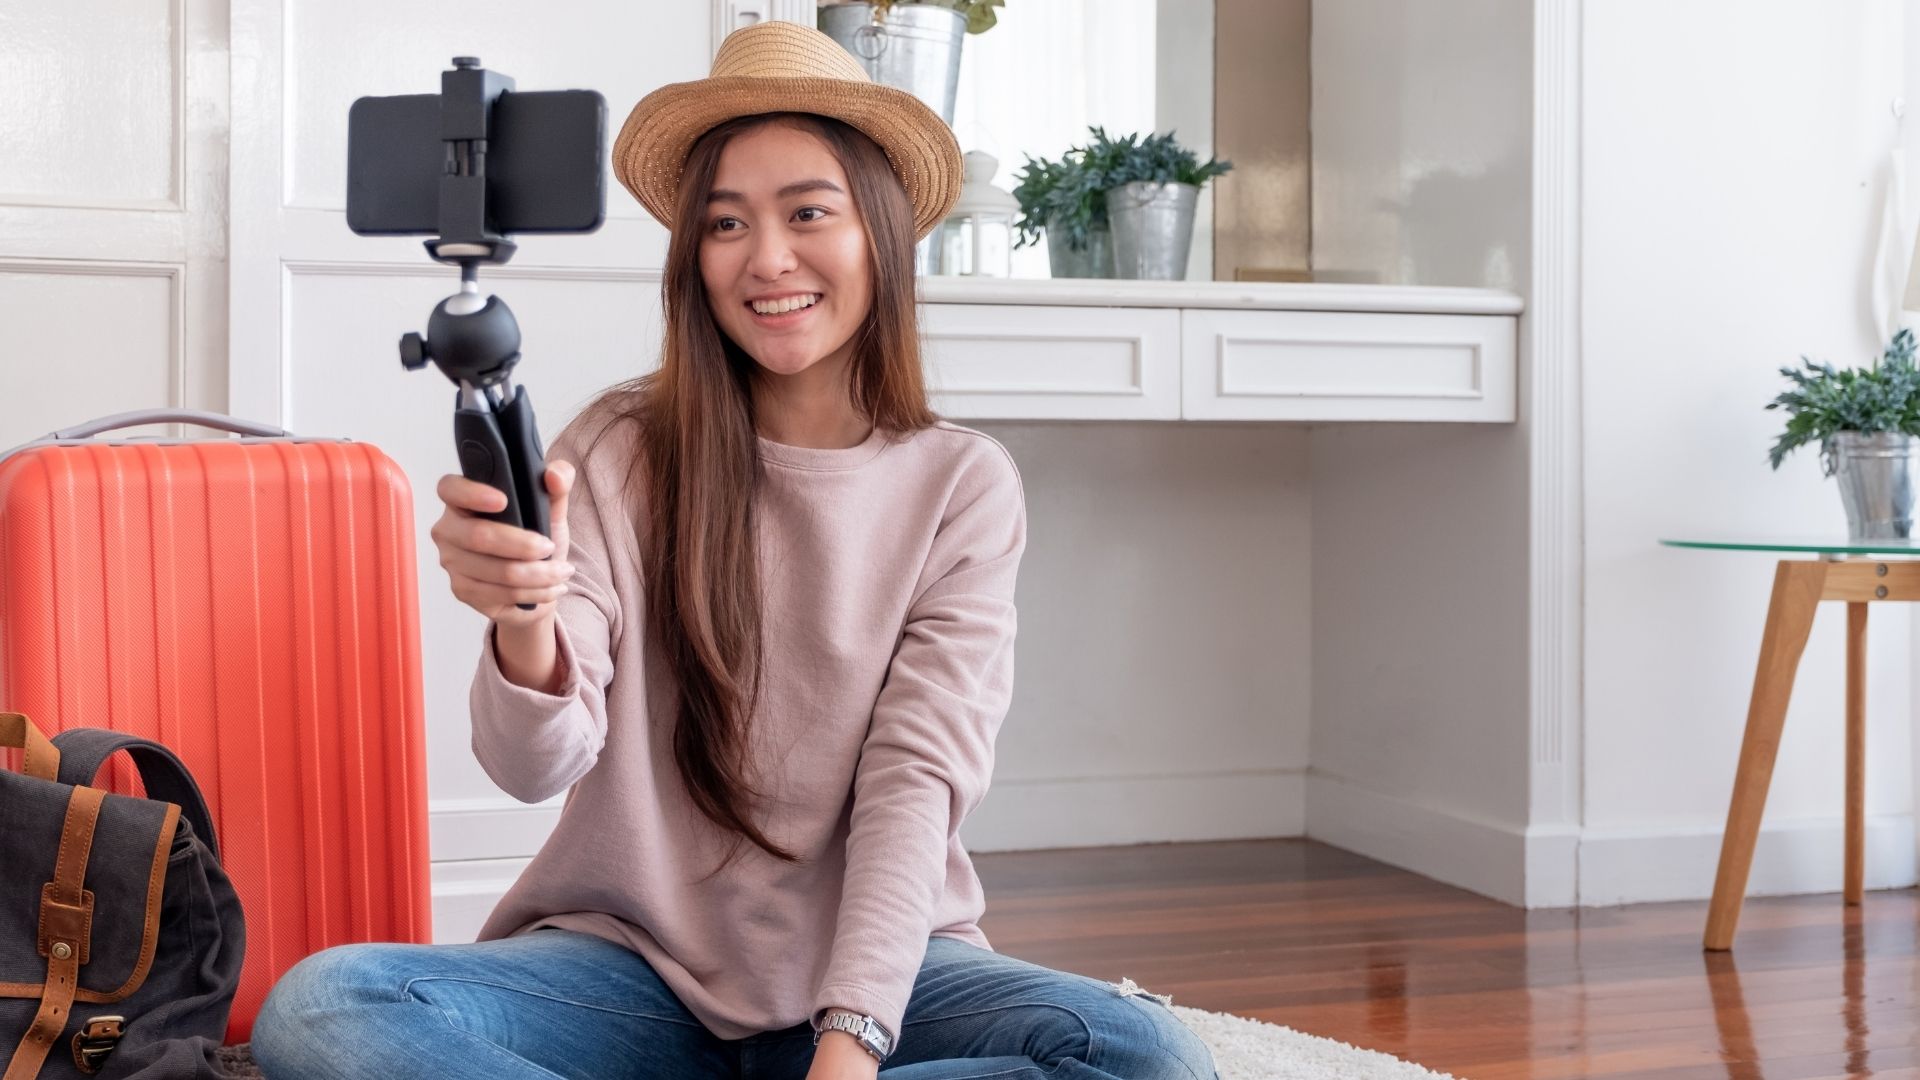 Influencer with hat filming herself